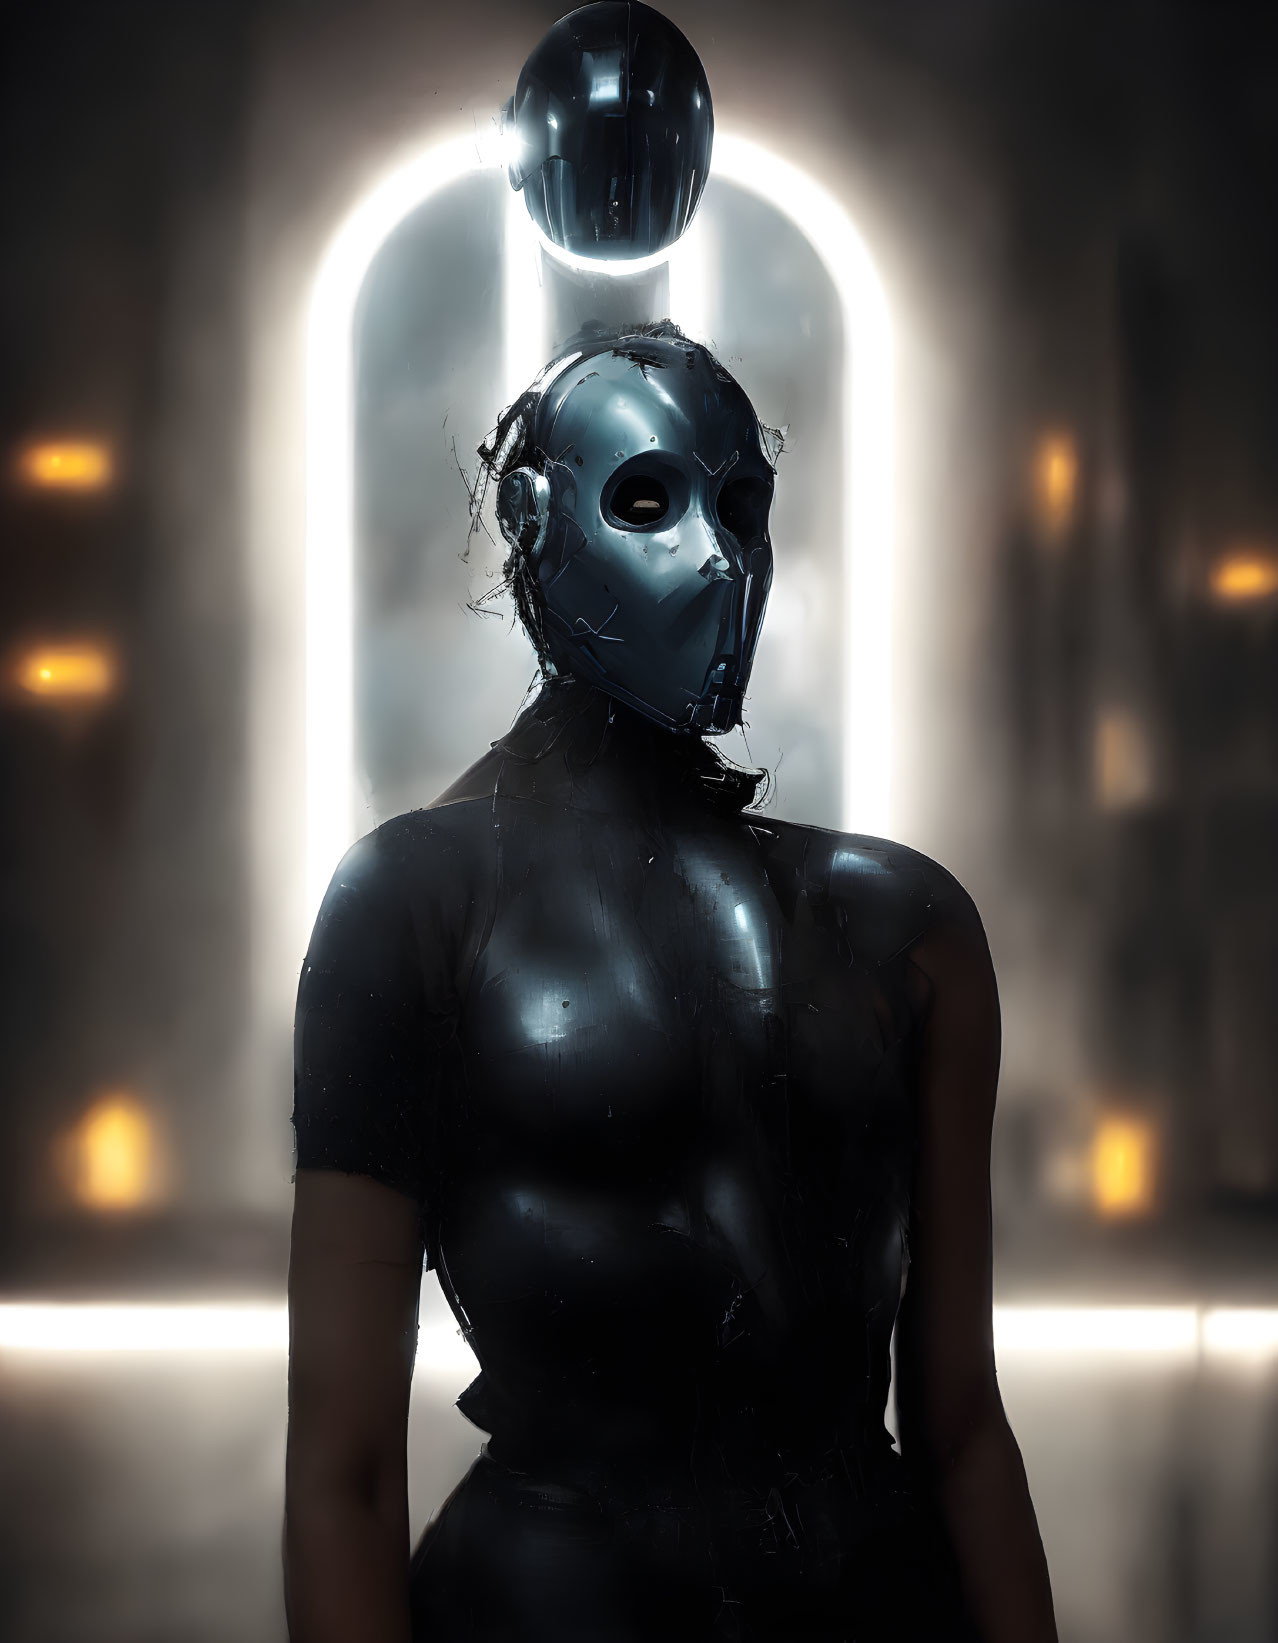 Glossy Black Humanoid Figure with Dark Mask in Soft Backlight